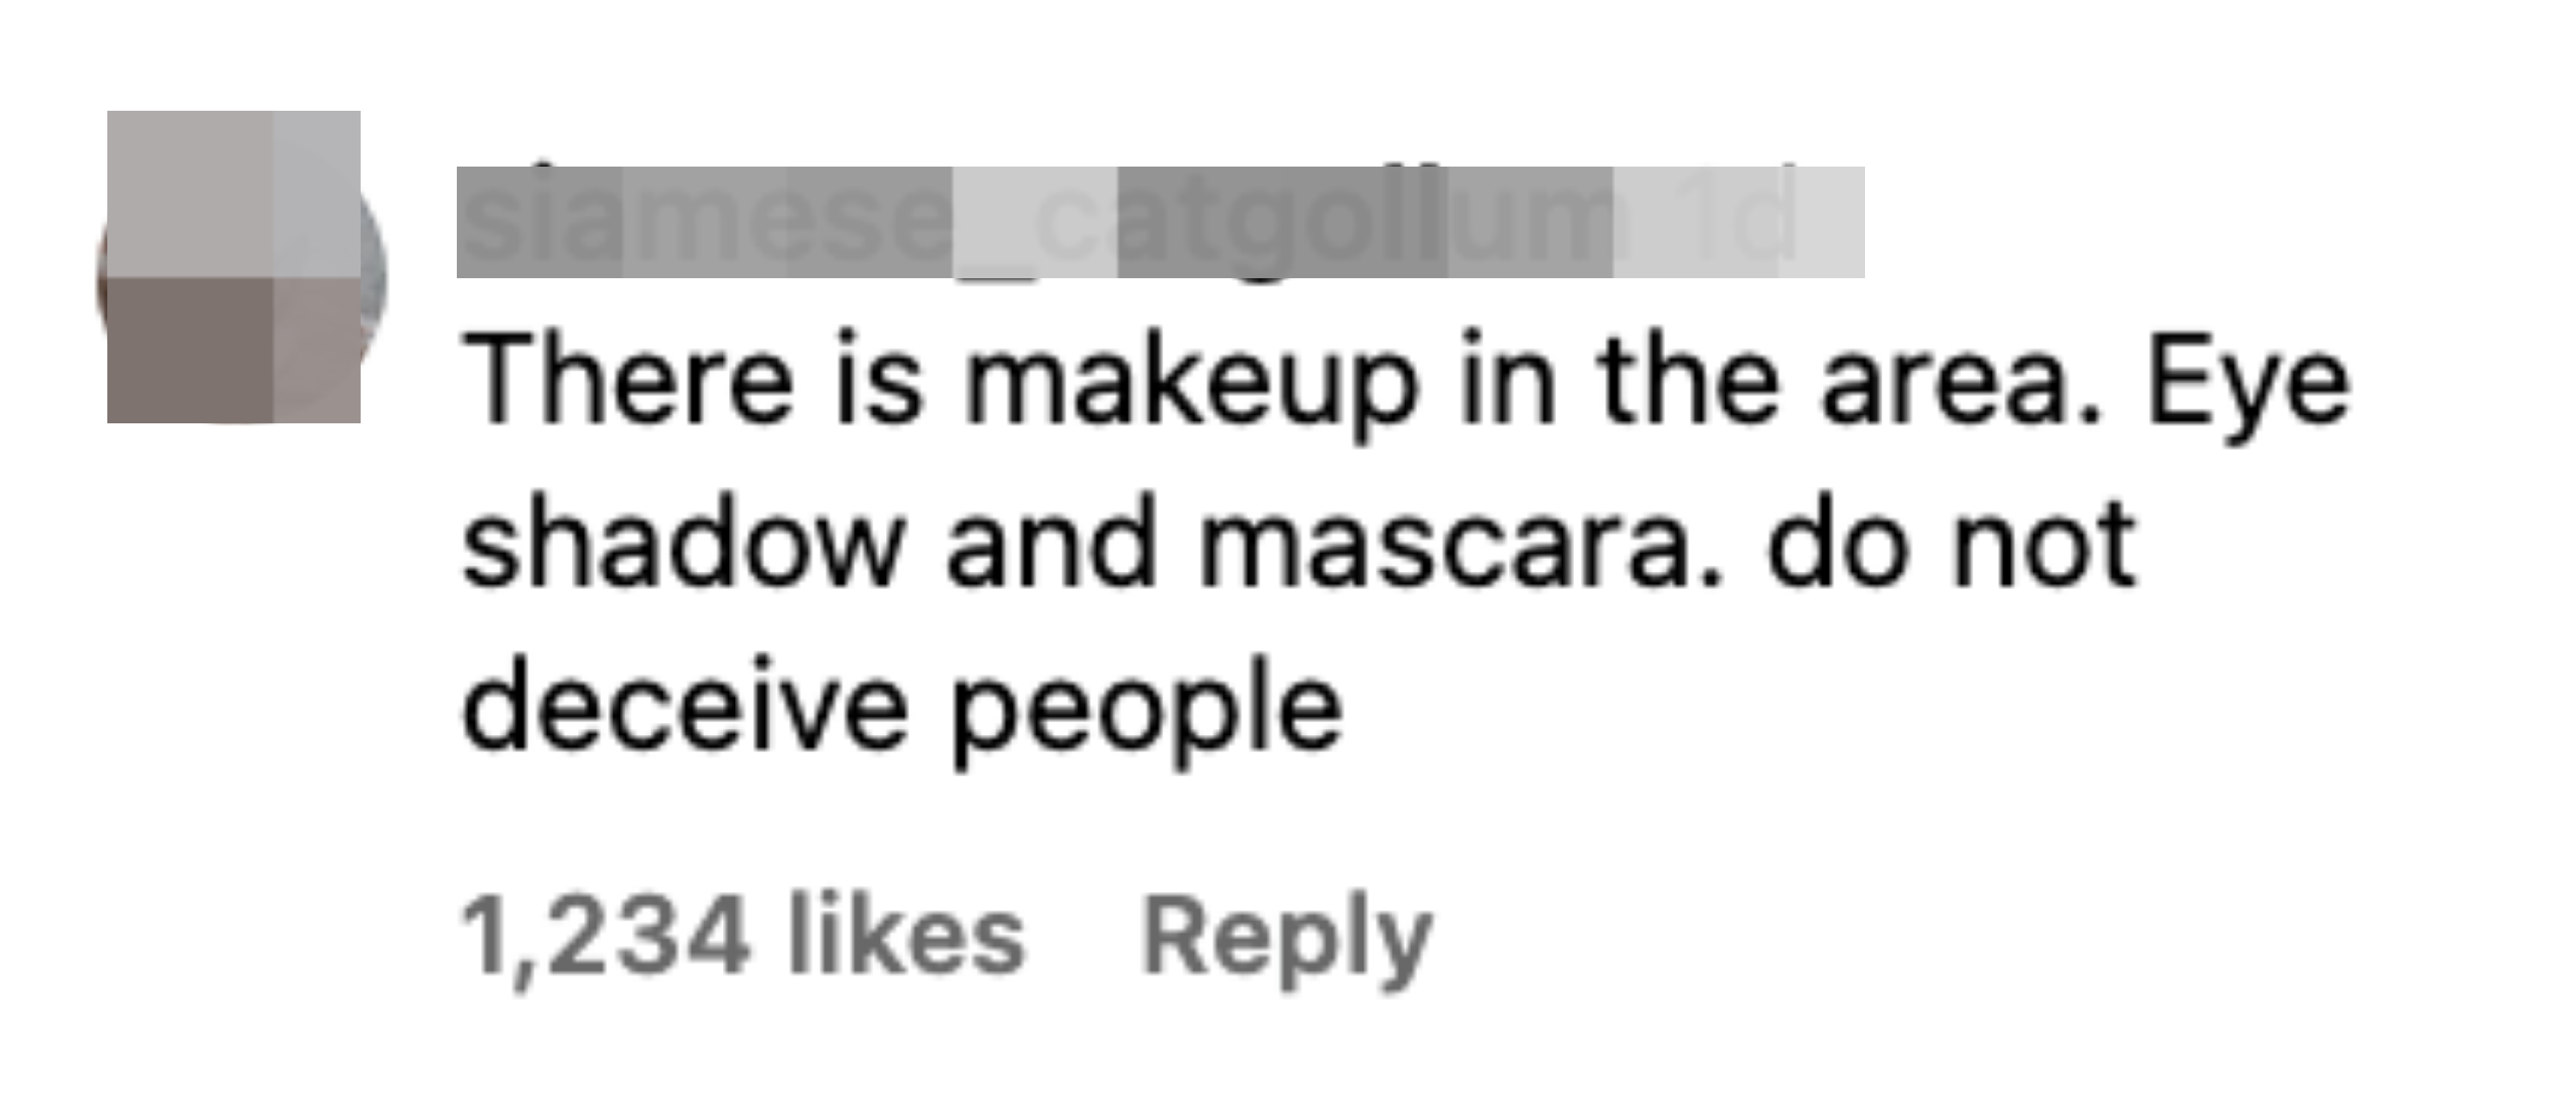 &quot;There is makeup in the area.&quot;